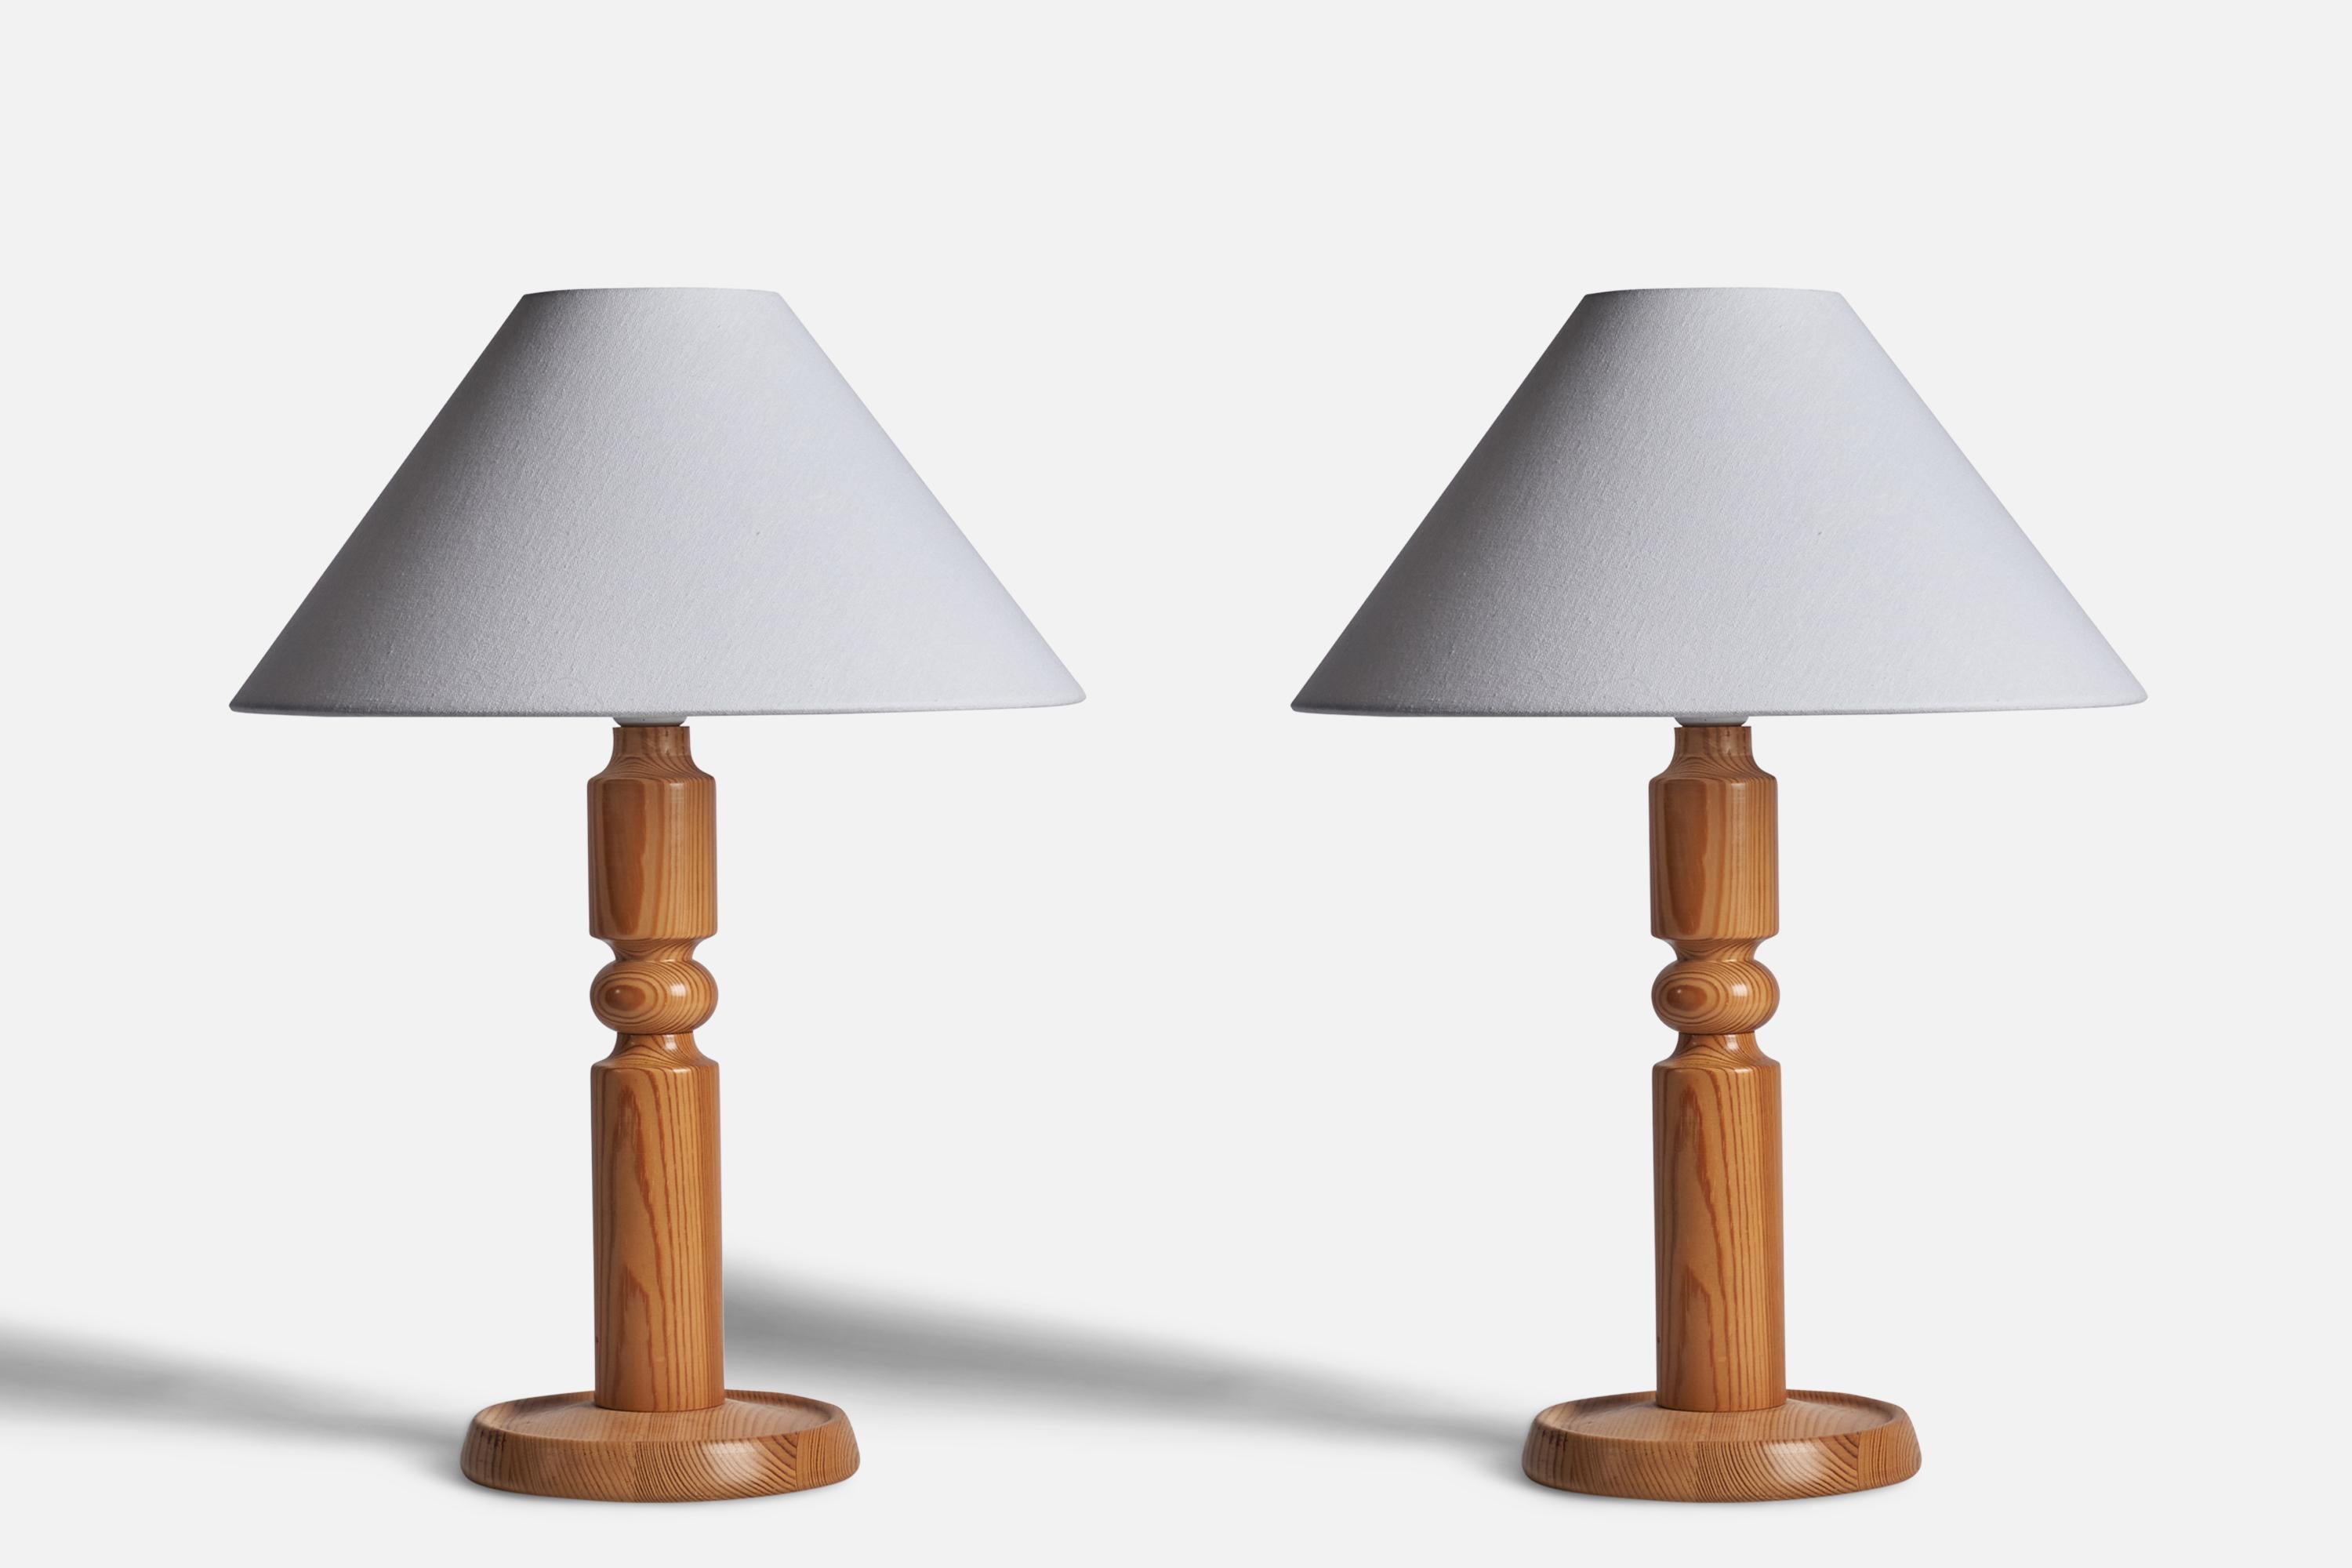 A pair of pine table lamps designed and produced in Sweden, c. 1970s.

Dimensions of Lamp (inches): 17.25” H x 7.4” Diameter
Dimensions of Shade (inches): 4.5” Top Diameter x 15.75” Bottom Diameter x 9” H
Dimensions of Lamp with Shade (inches):